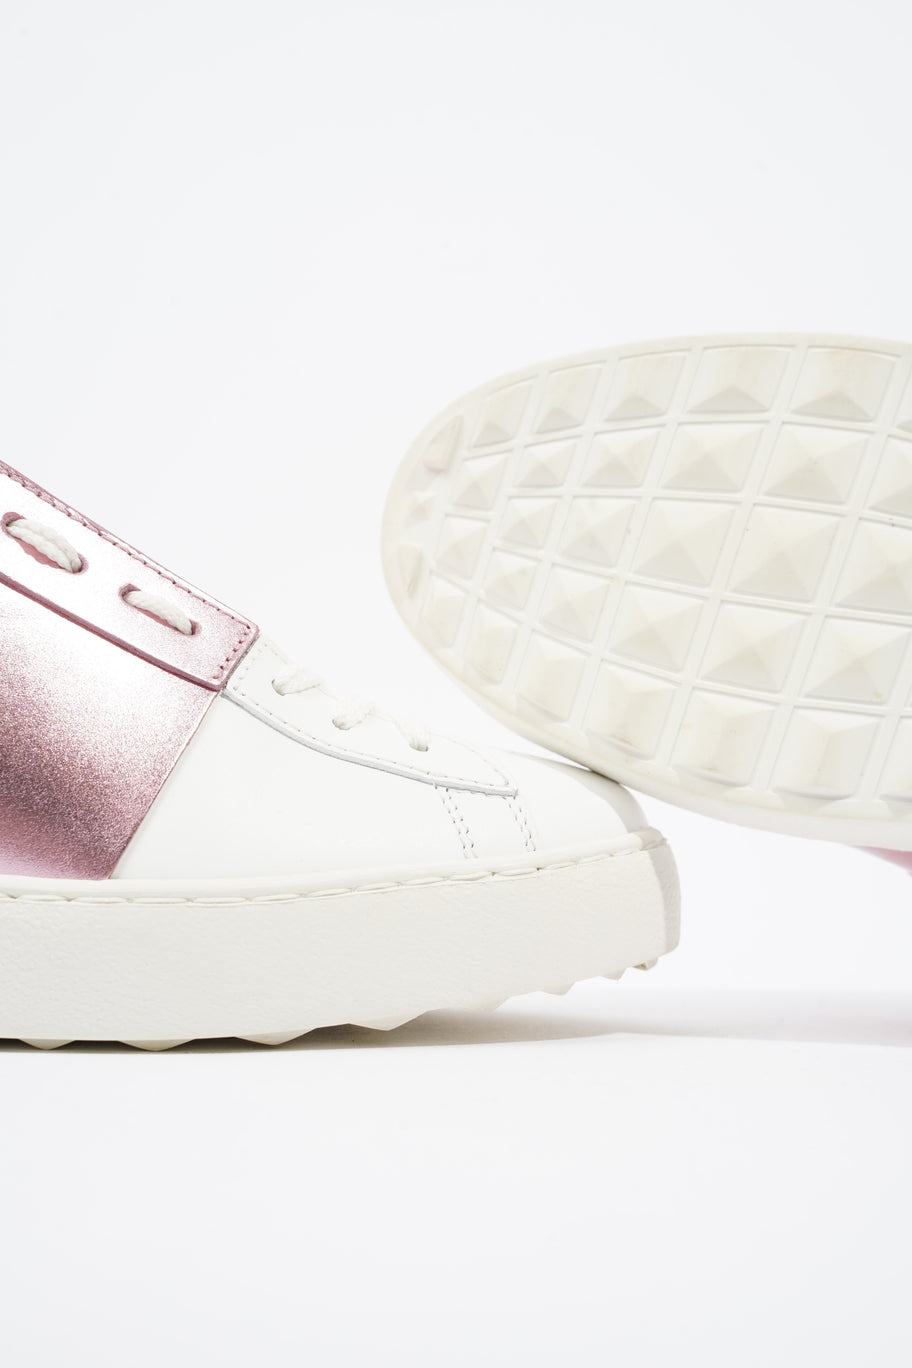 Open Sneakers White / Pink Leather EU 37.5 UK 4.5 Image 11